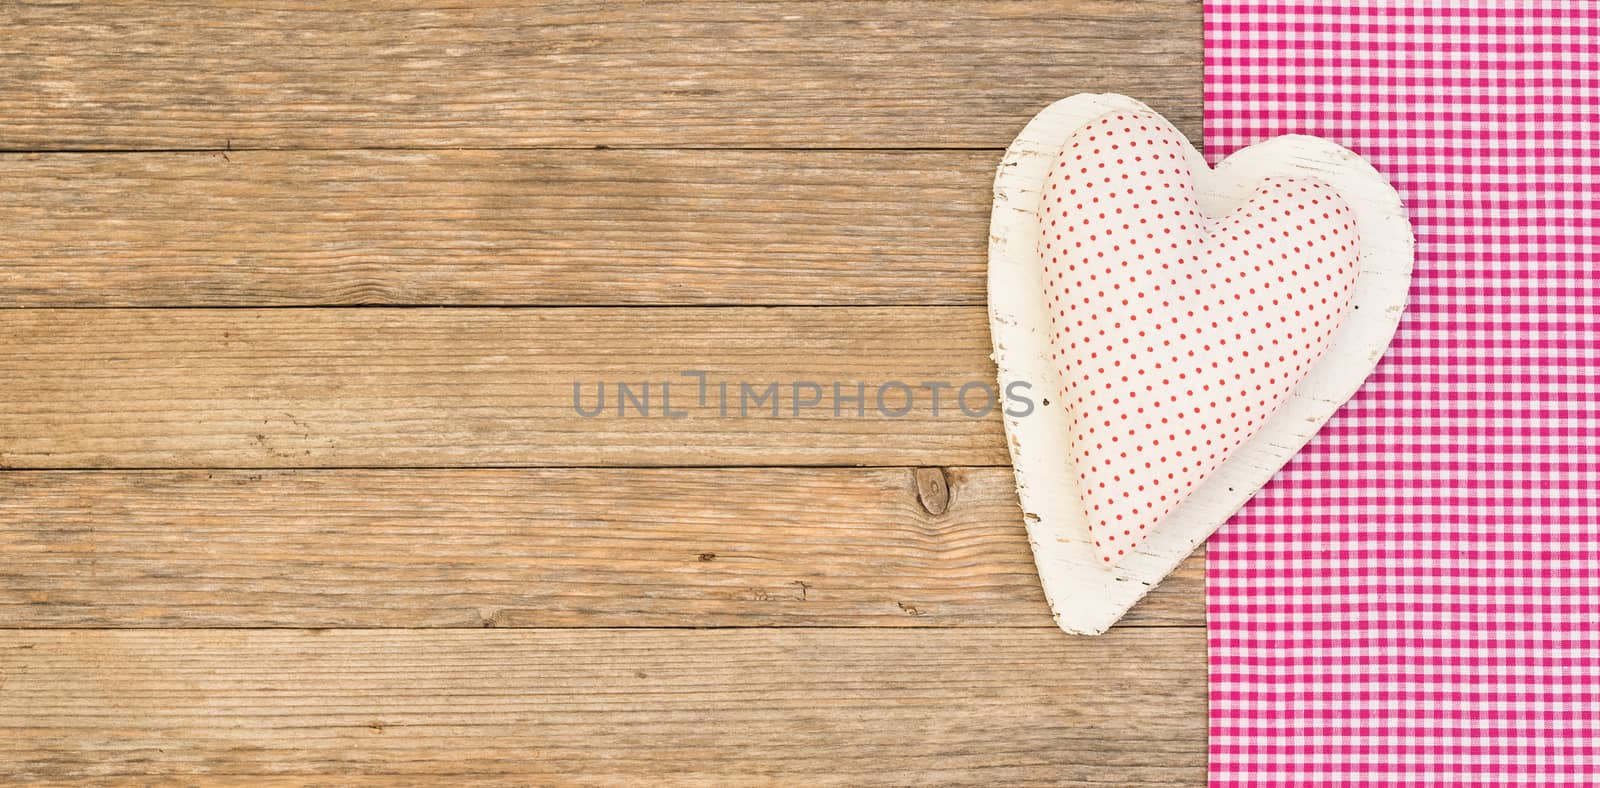 Romantic background with fabric heart on wood with copy space